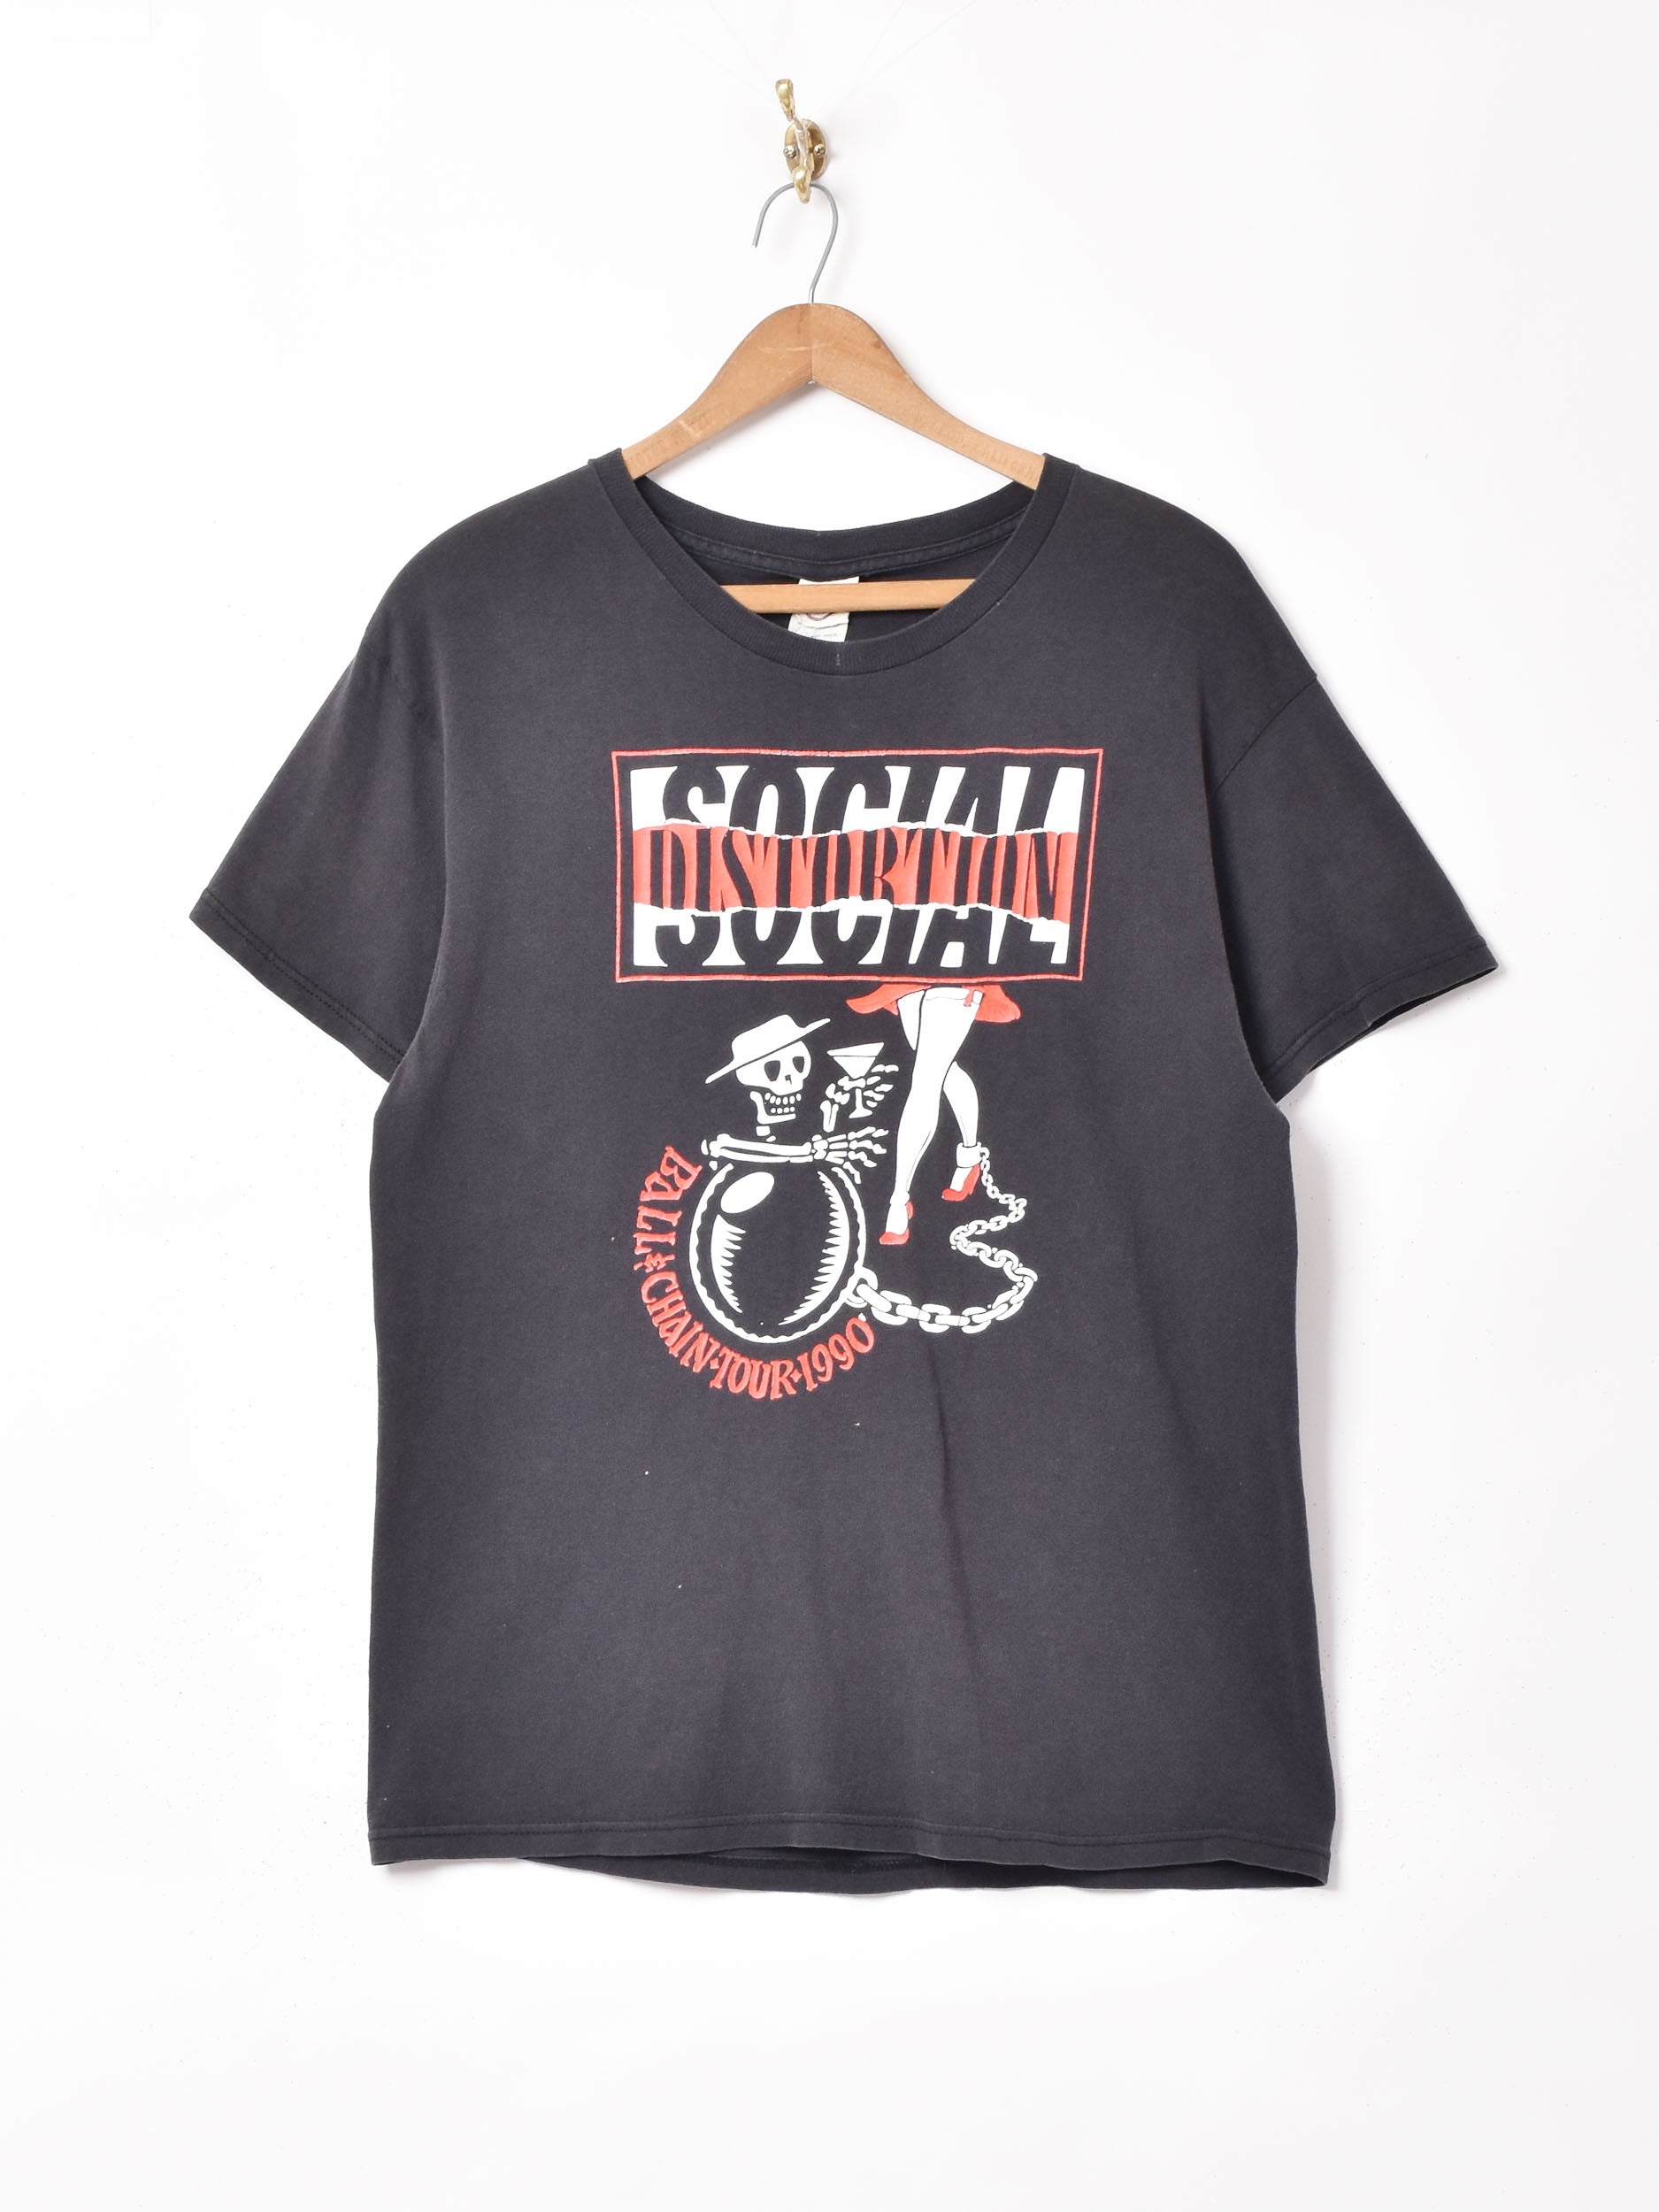 Social Distortion プリントTシャツ – 古着屋Top of the Hillのネット通販サイト